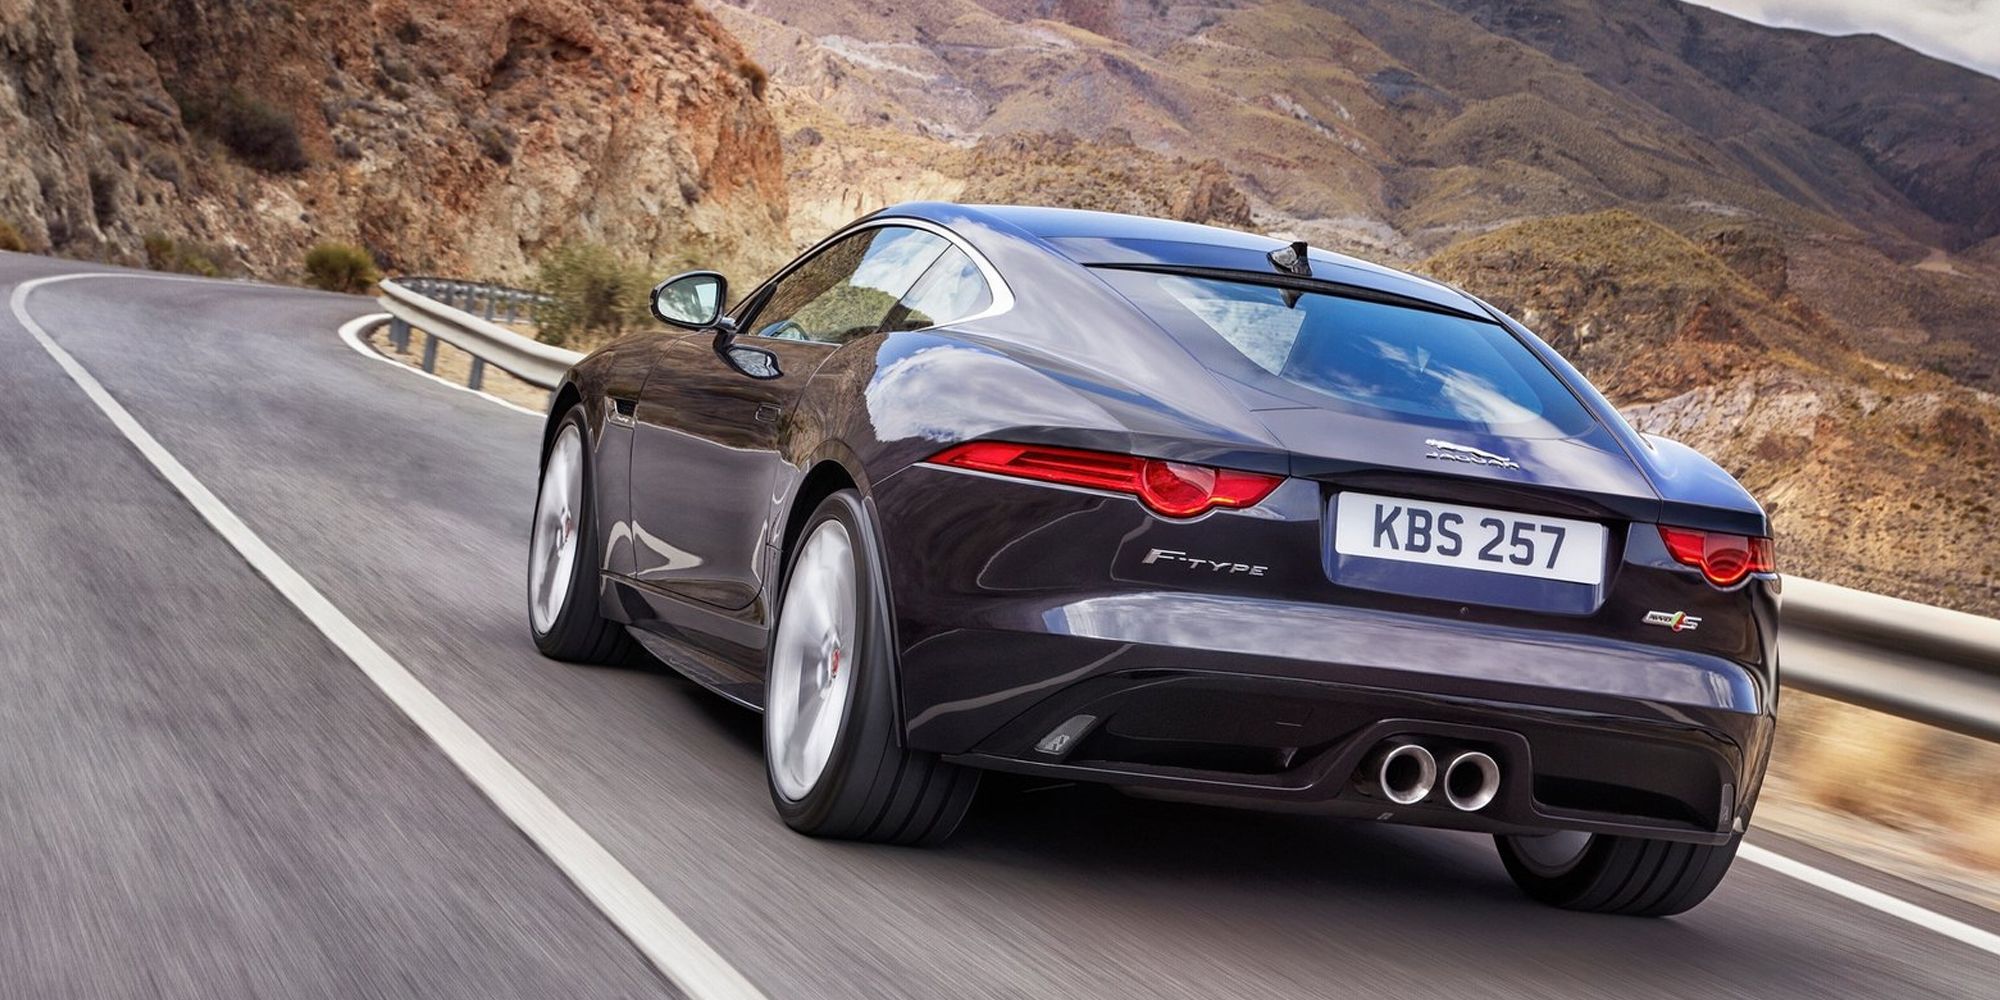 The rear of a black F-Type Coupe on the move